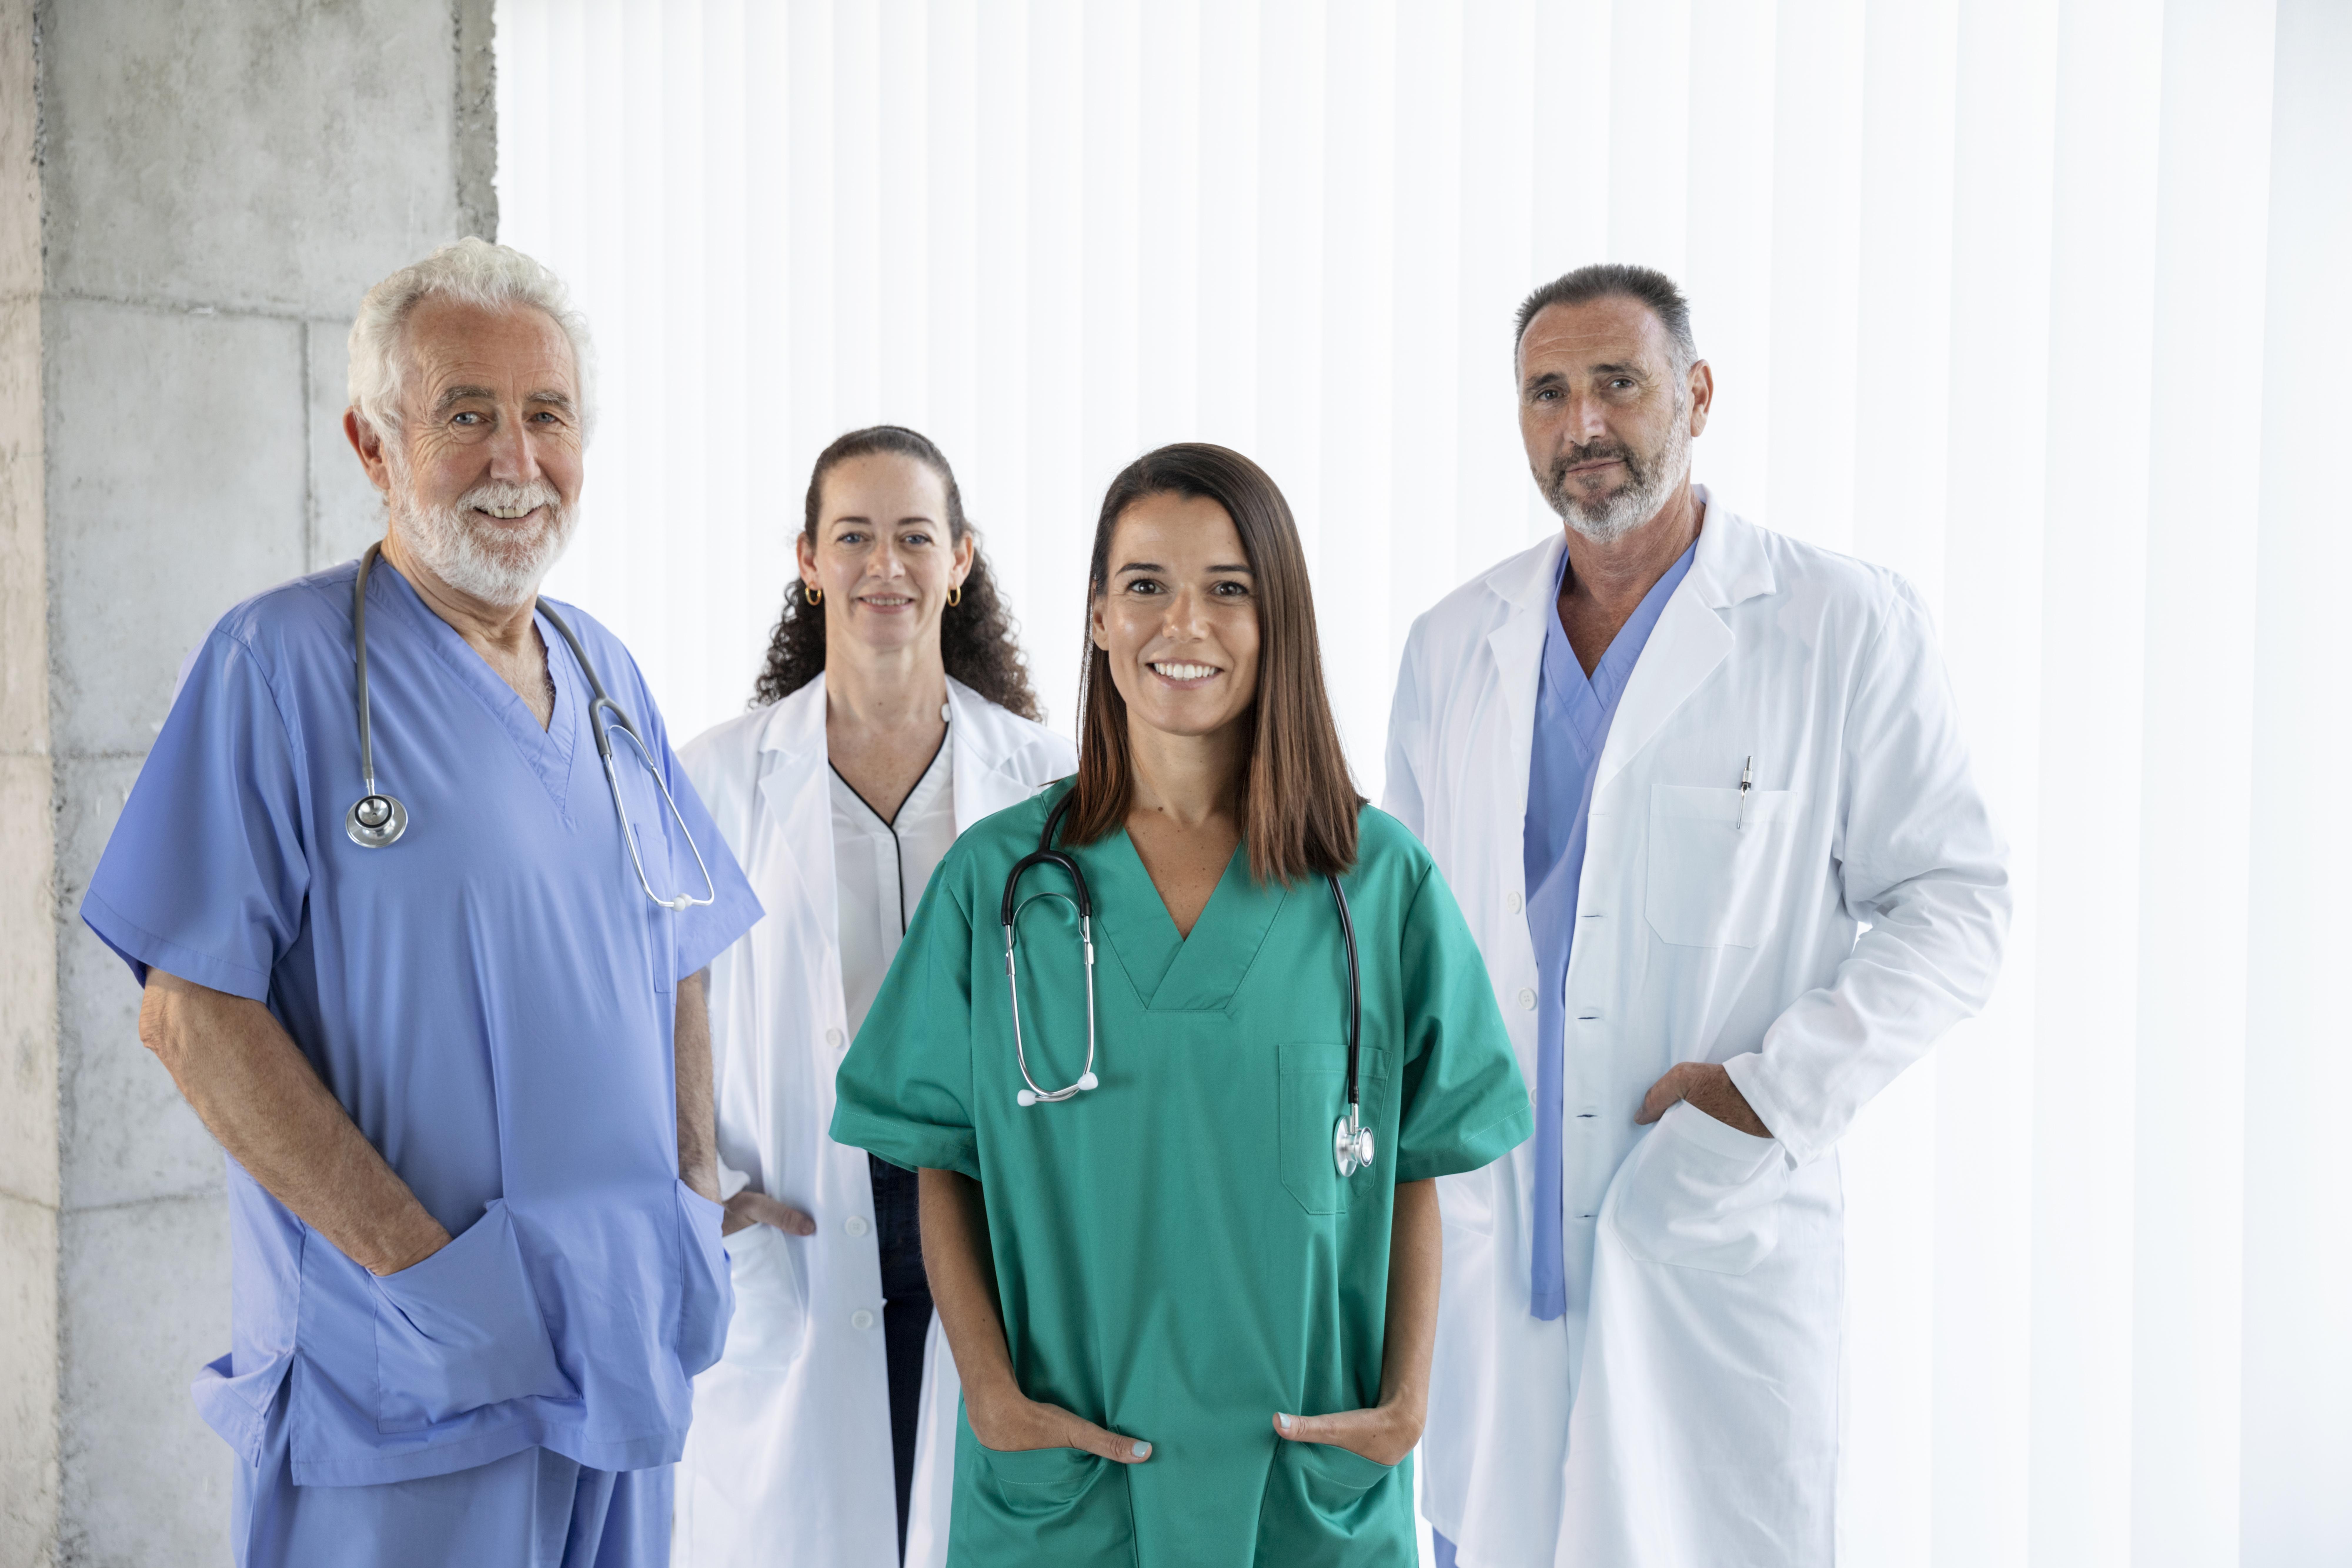 5 Exciting Healthcare Careers You Can Earn in 1 Year